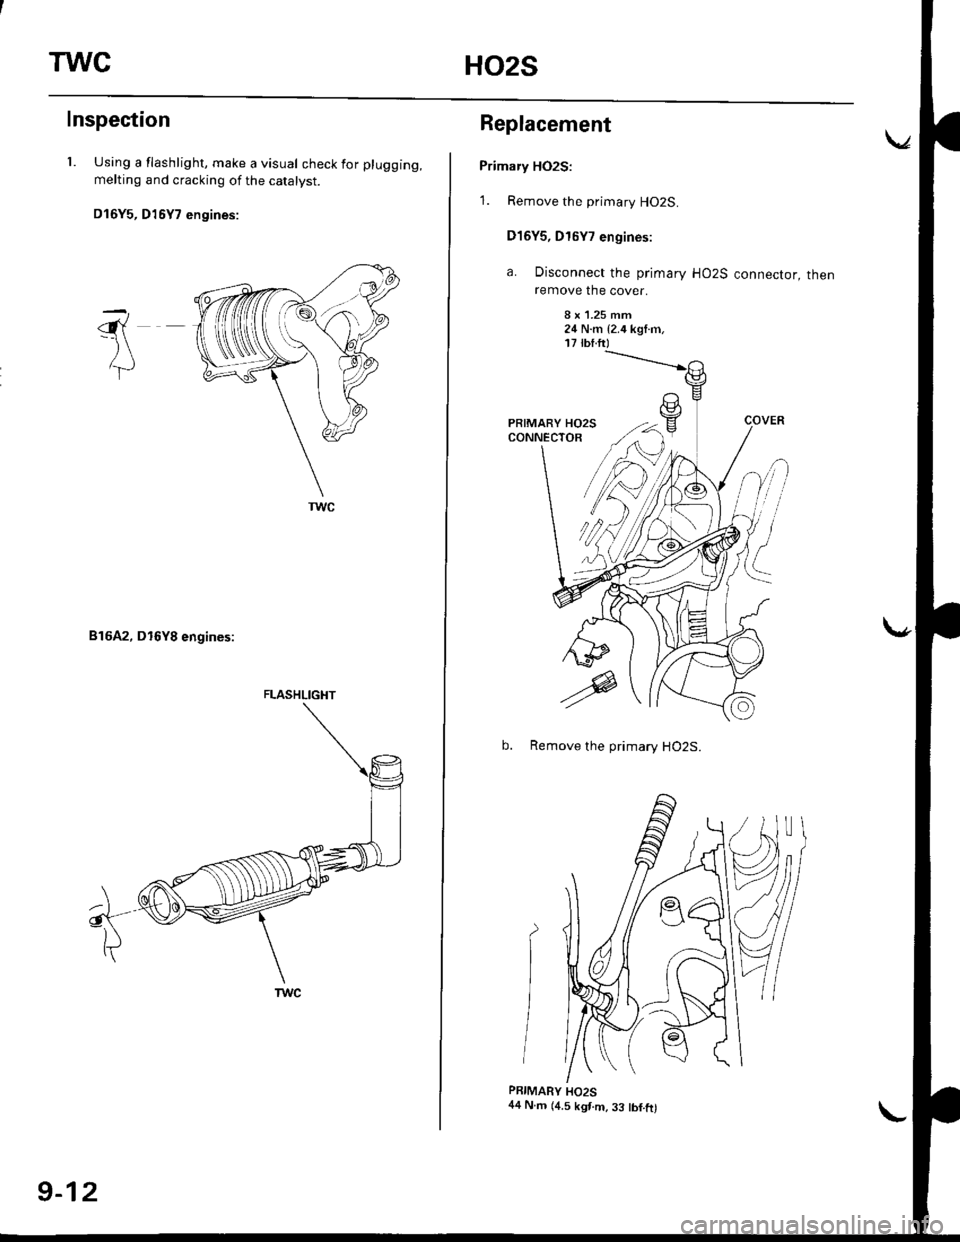 HONDA CIVIC 1997 6.G Workshop Manual TWCHO2S
Inspection
l. Using a flashlight, make a visual check for plugging,
melting and cracking of the catalyst.
D16Y5, D16Y7 engines:
816A2, D16Y8 engines:
-\6{-)\
lT
a
A
FLASHLIGI{T
9-12
Replacemen